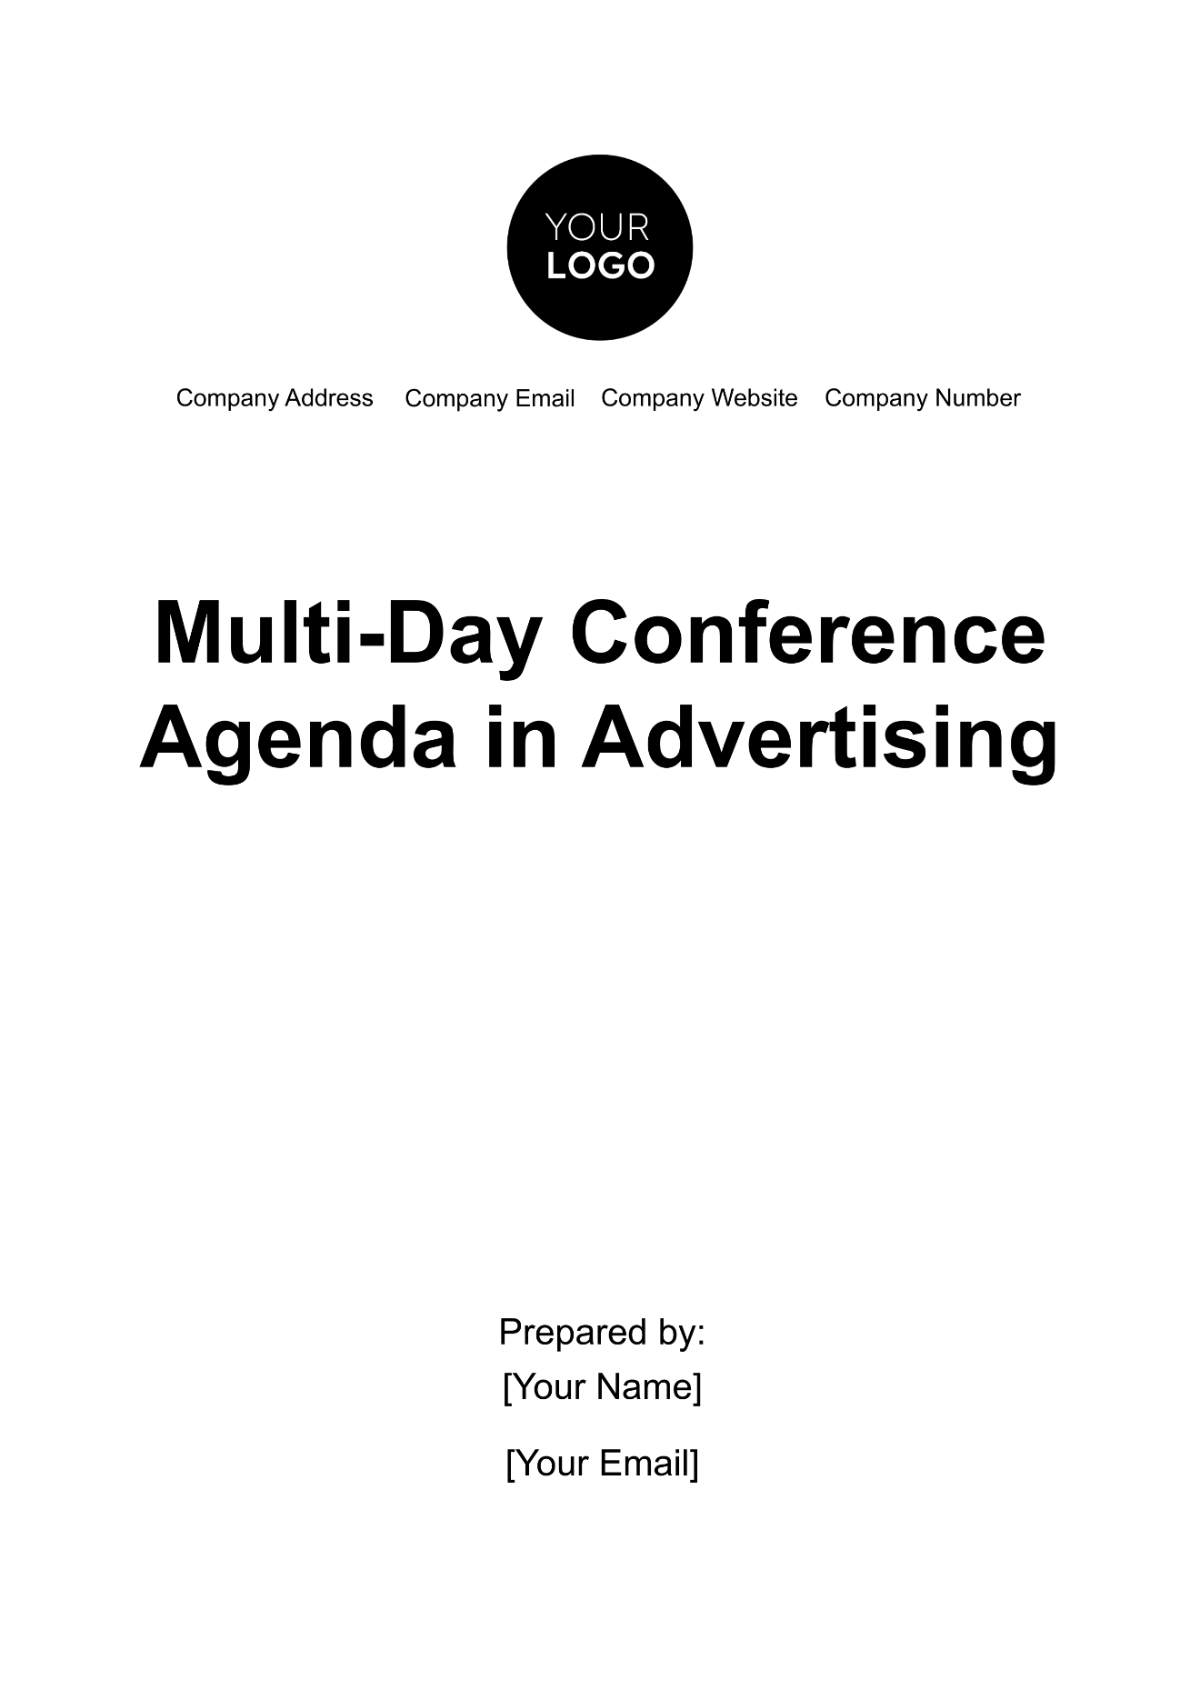 Free Multi-Day Conference Agenda in Advertising Template